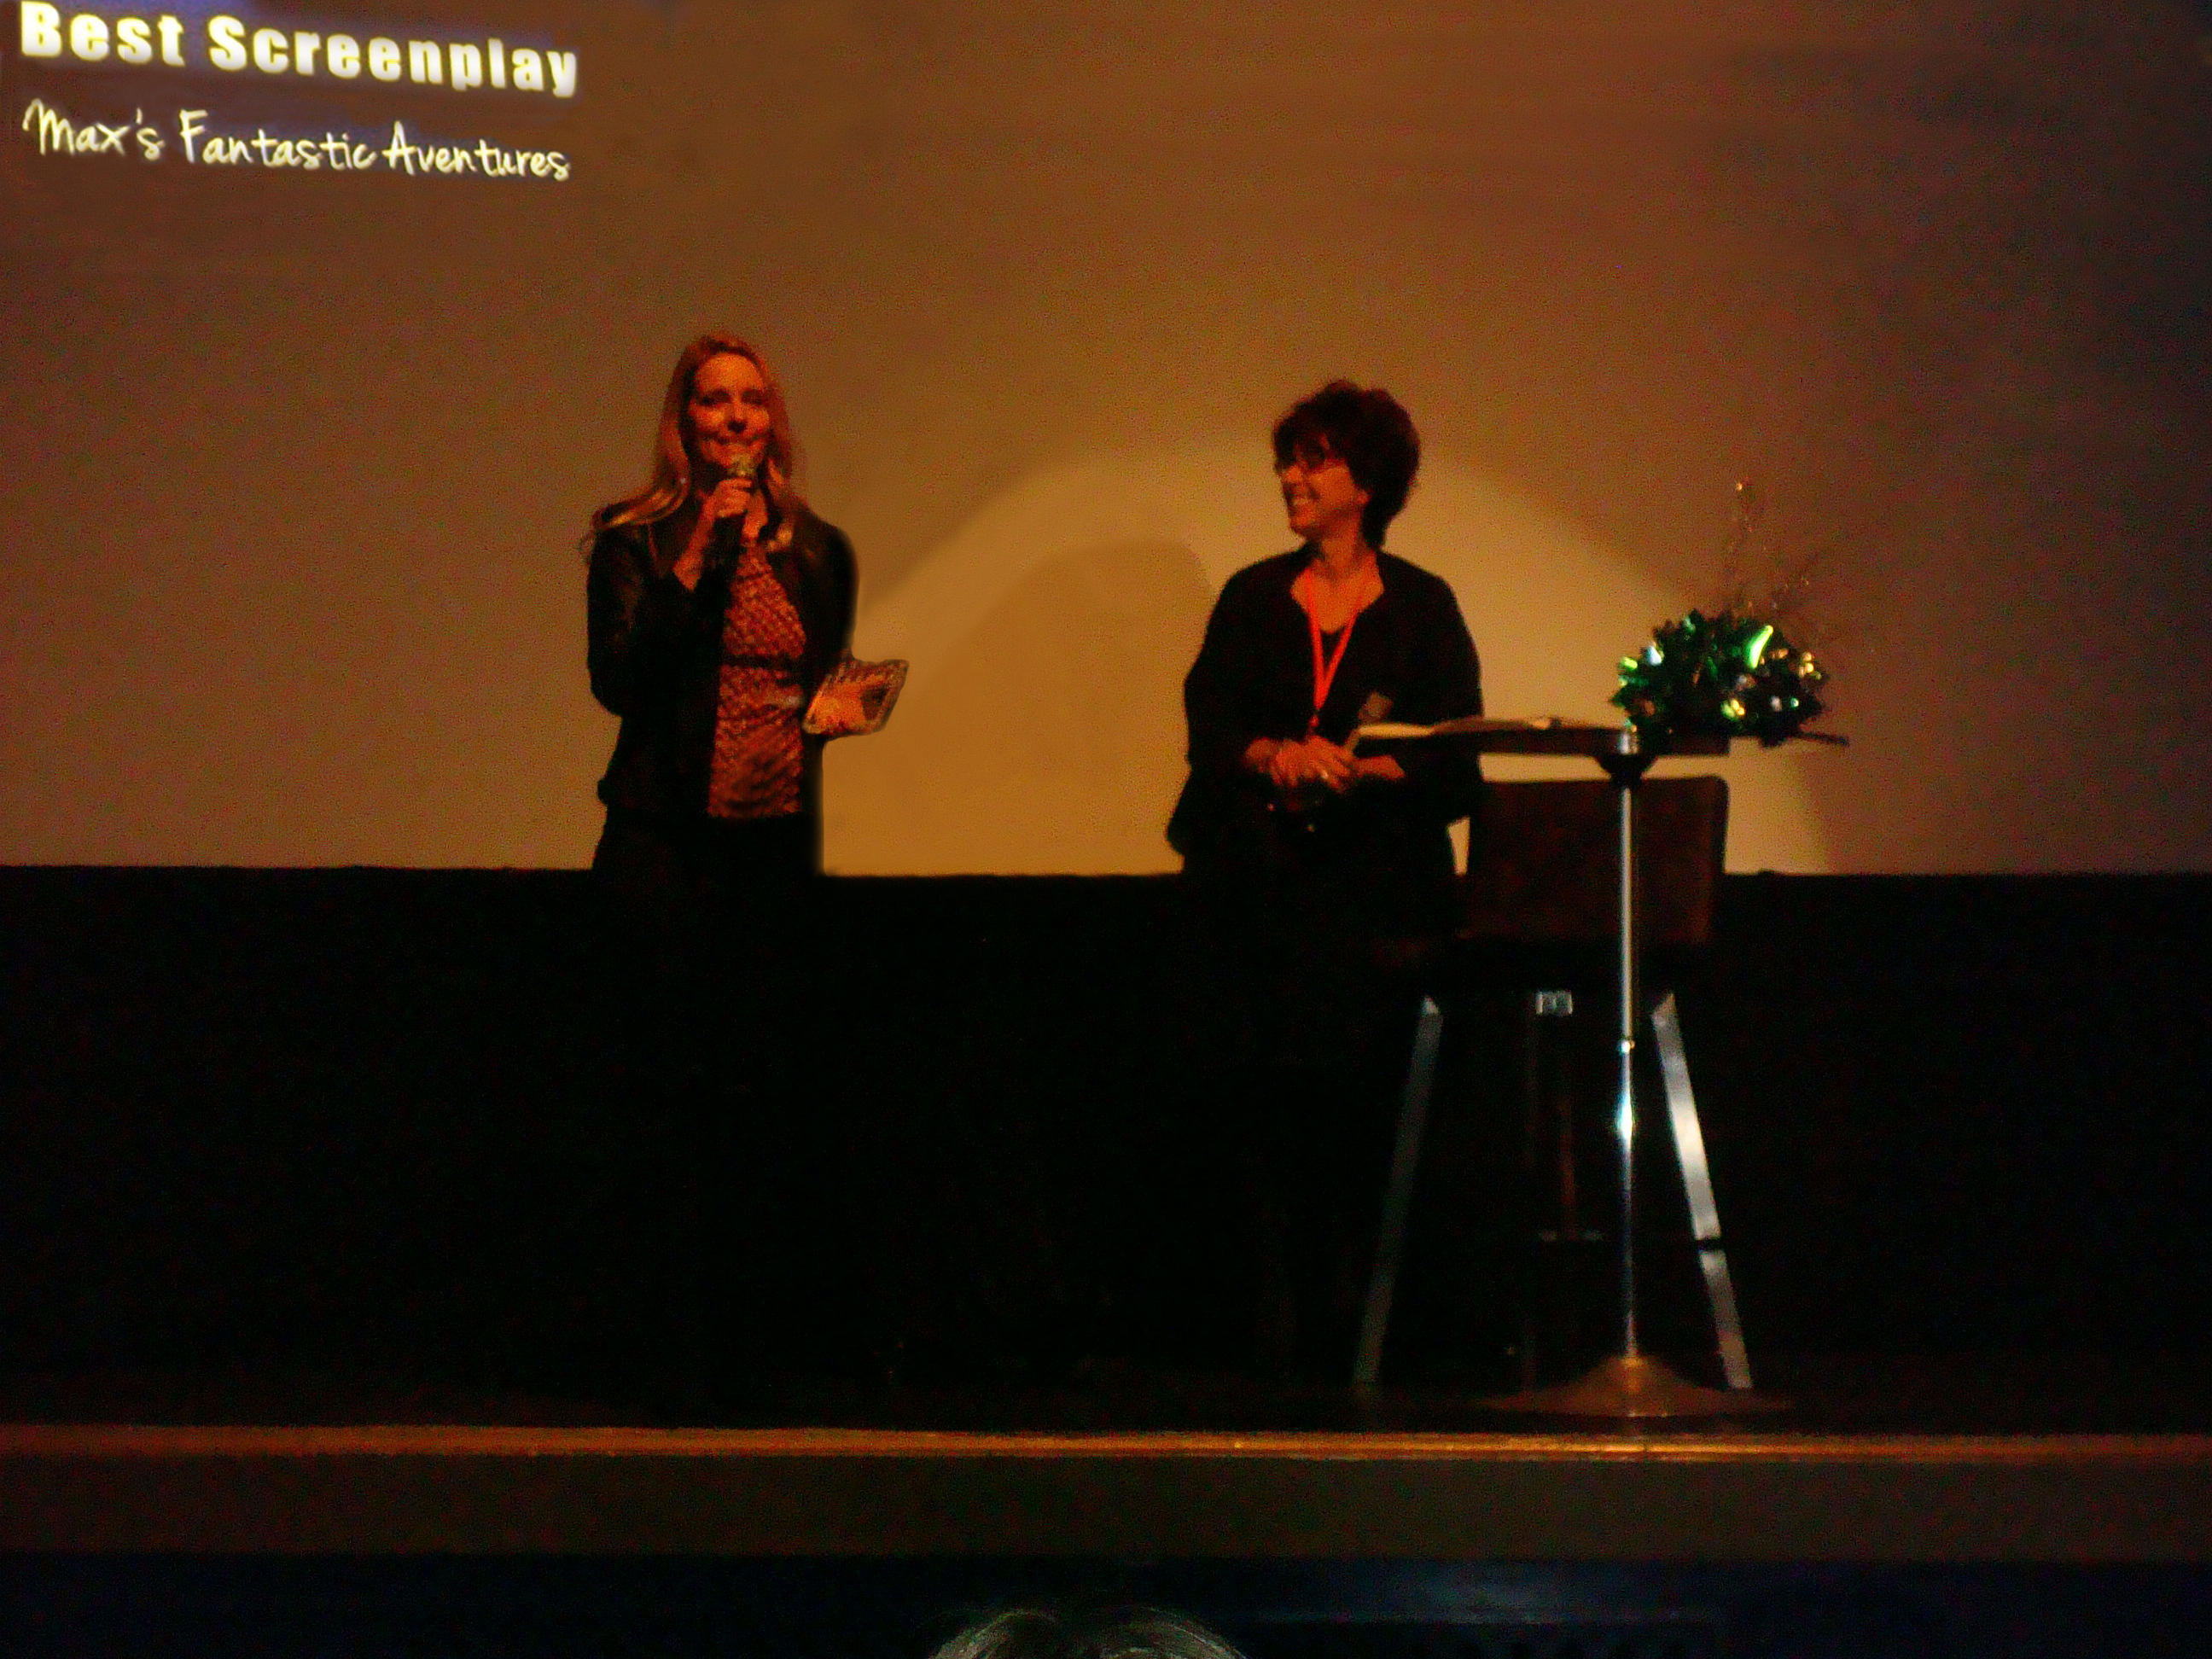 Producer, Linda Kruse accepting the SLATE Award for Best Screenplay for 